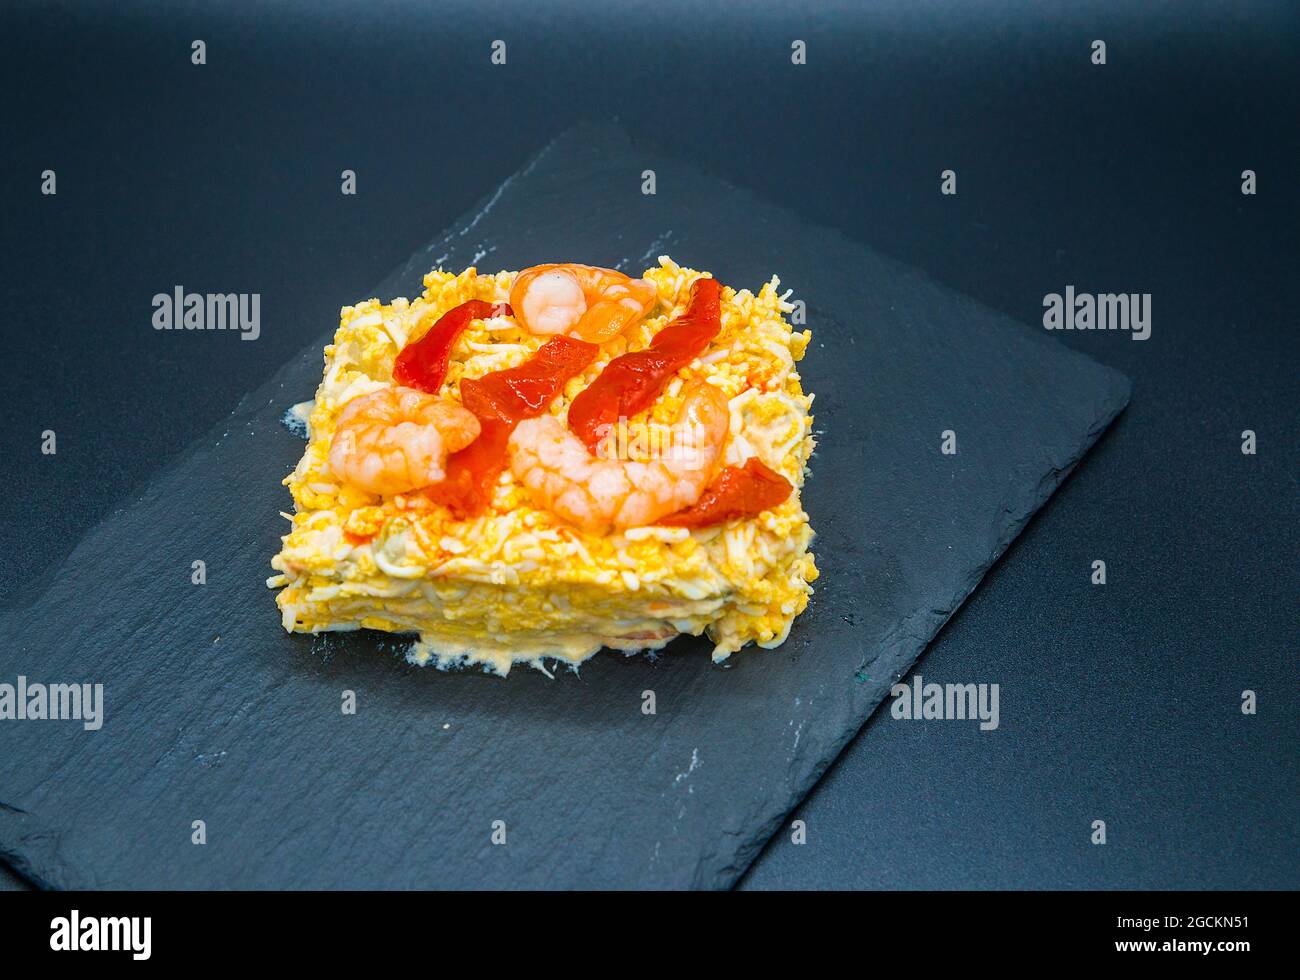 Russian salad serving. Spain. Stock Photo